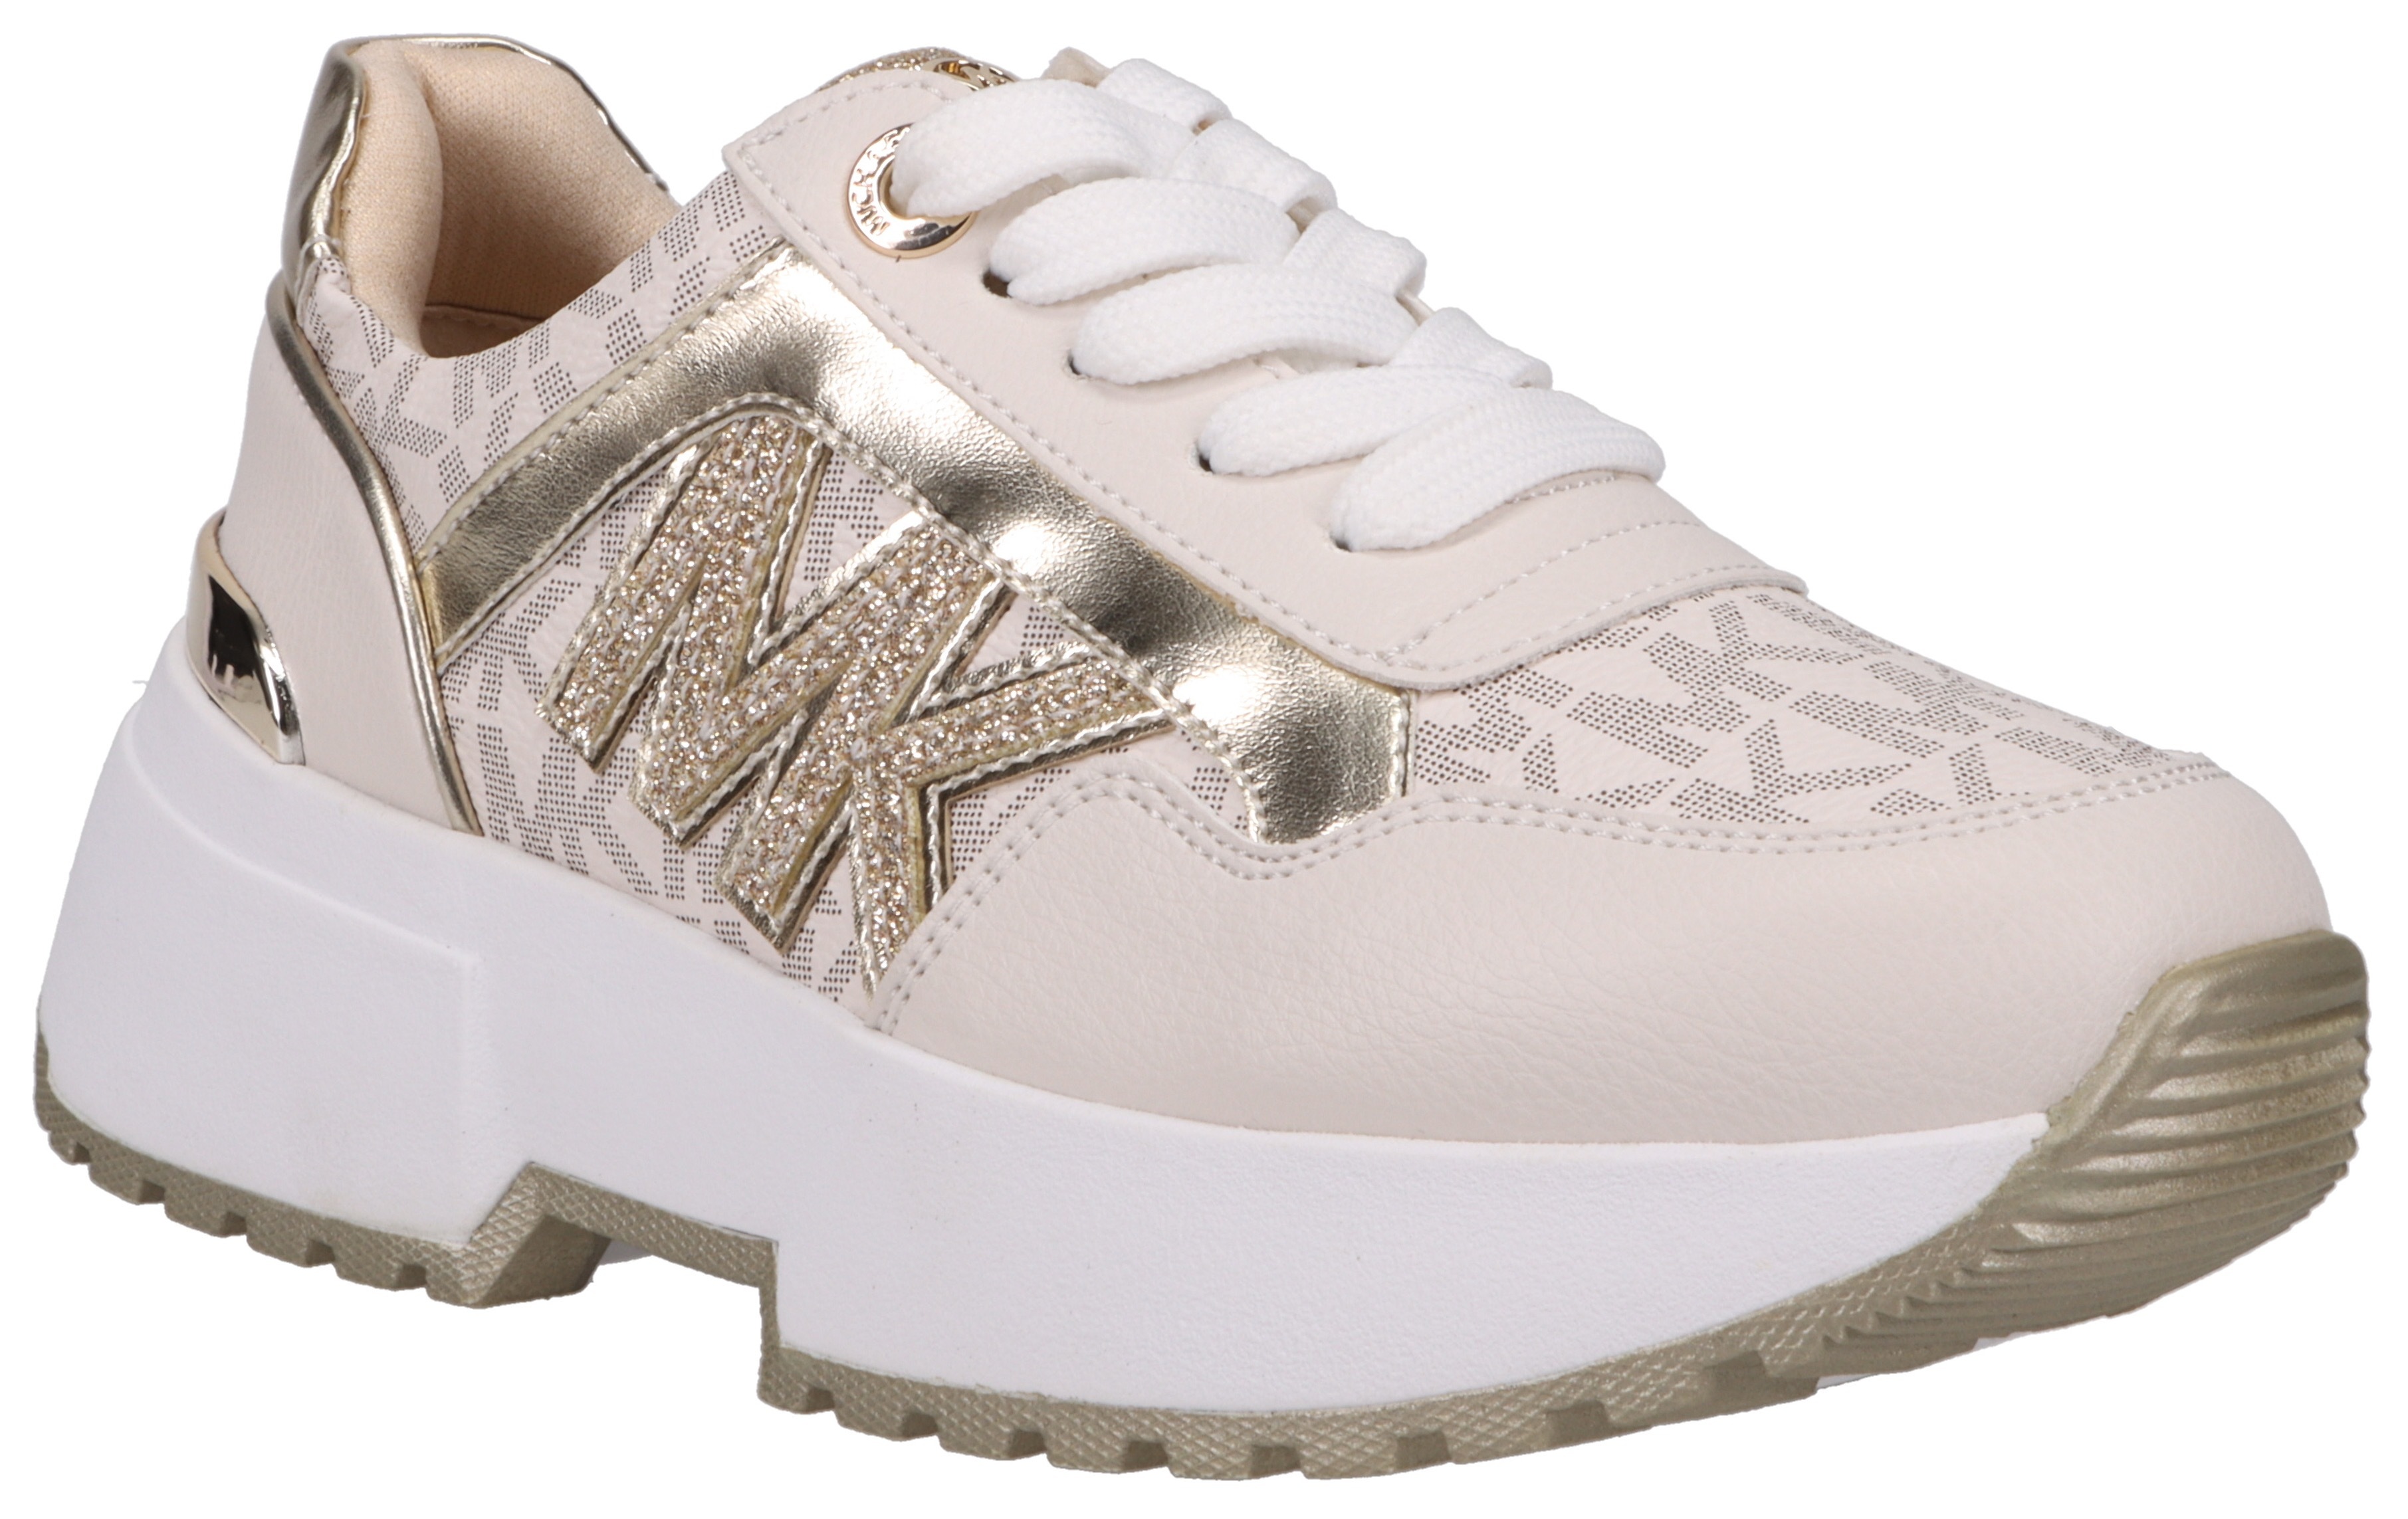 MICHAEL KORS KIDS Plateausneaker »Cosmo Maddy«, mit Chunky-Sohle